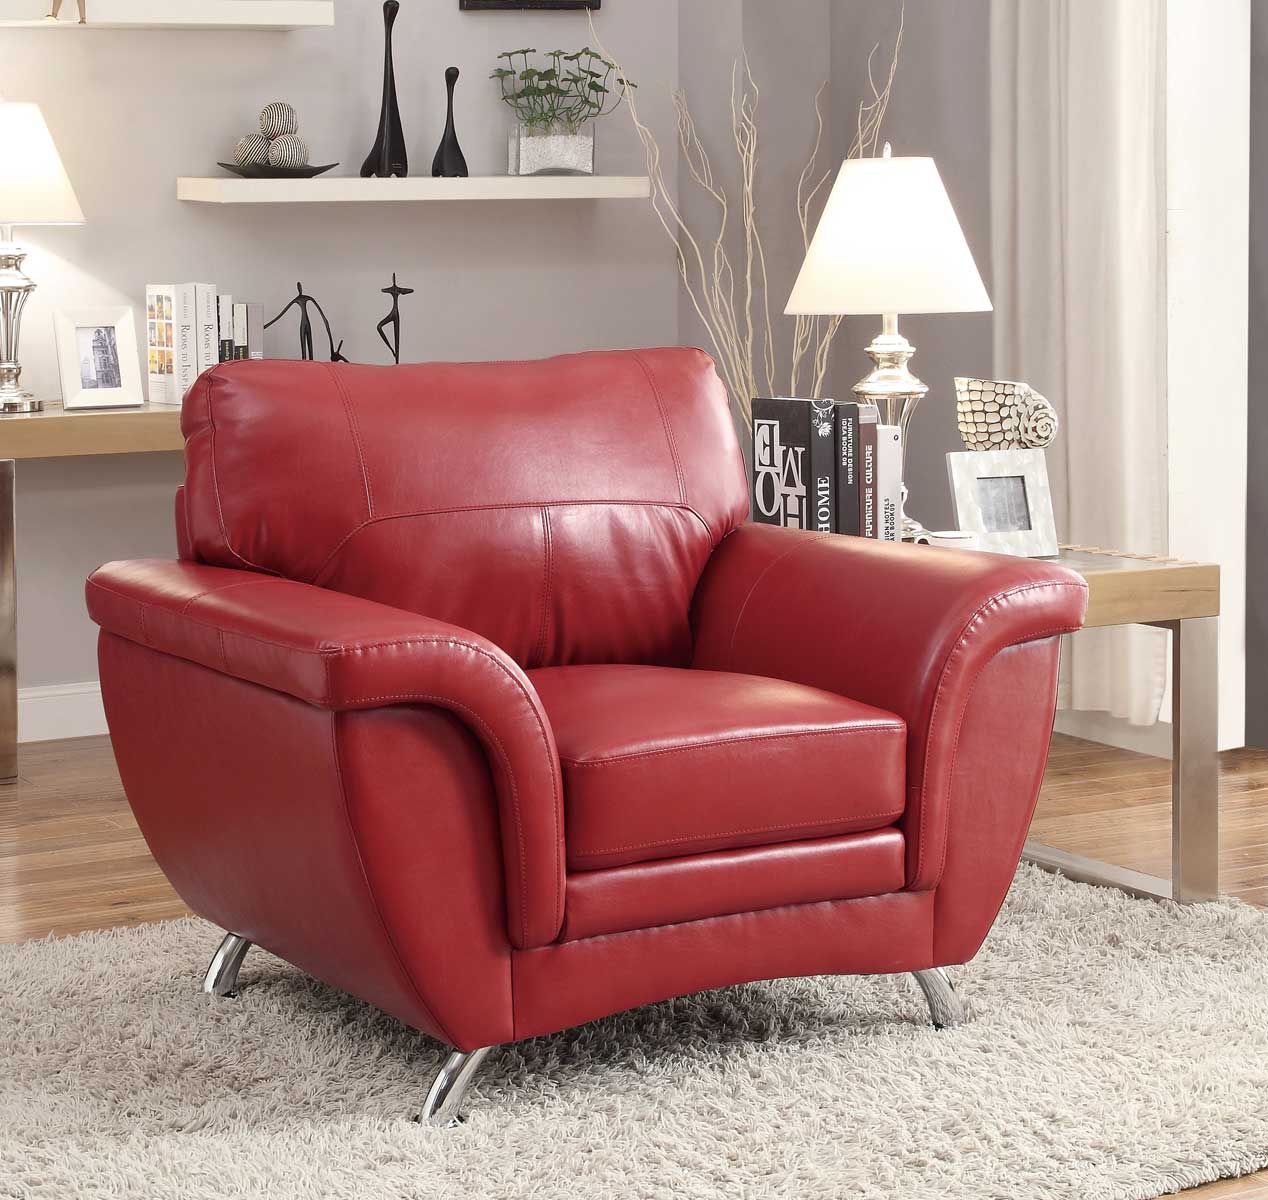 Homelegance Chaska Chair - Red Bonded Leather Match